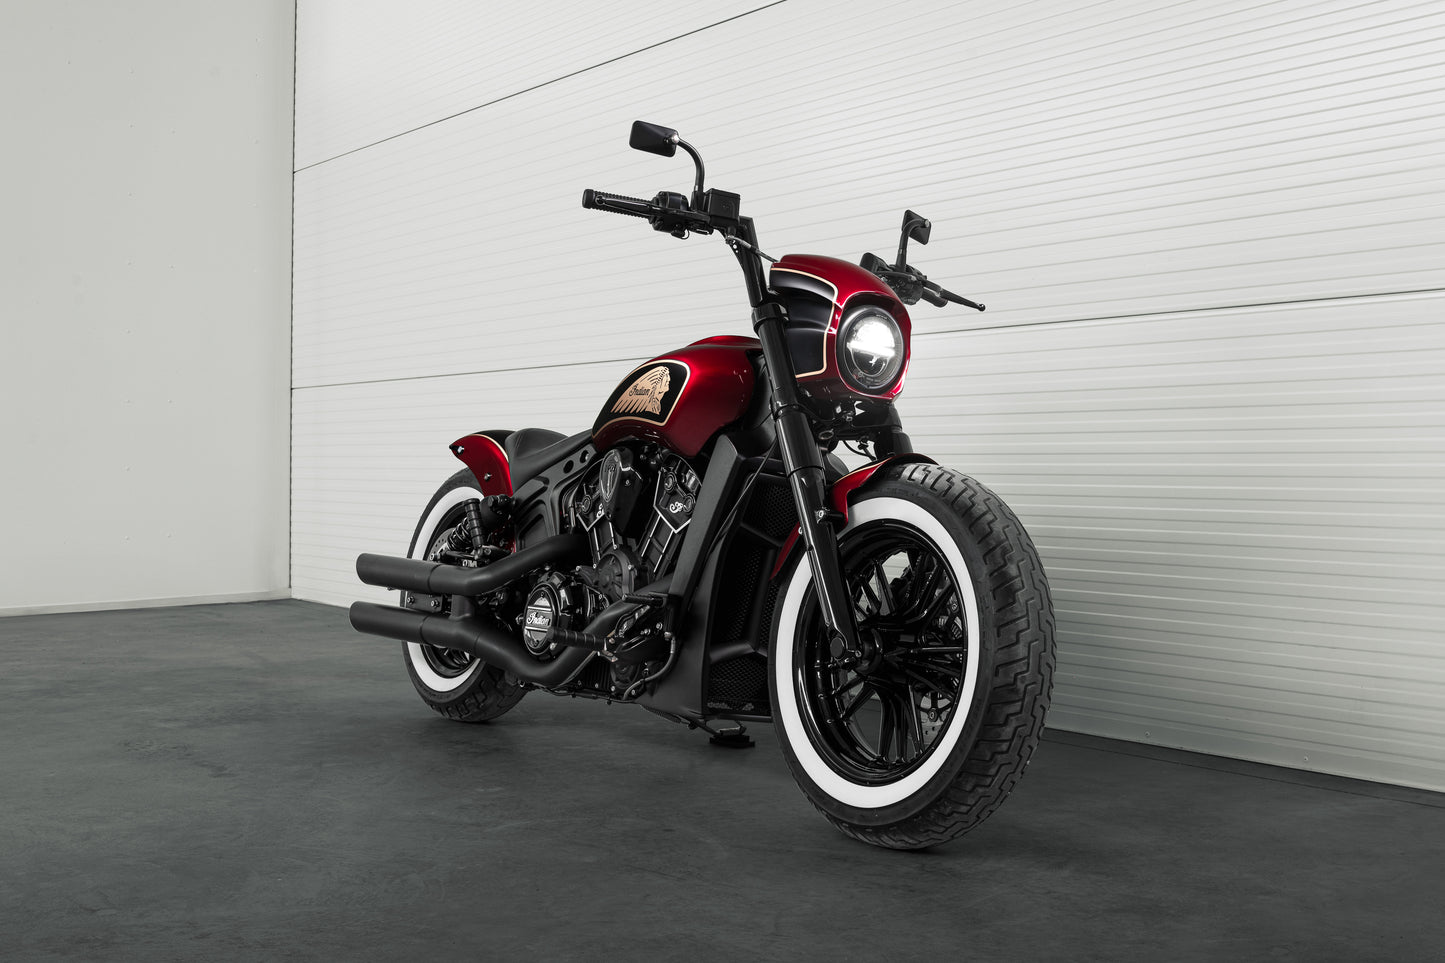 Harley Davidson motorcycle with Killer Custom "Tomahawk" series headlight fairing from the side in a modern garage